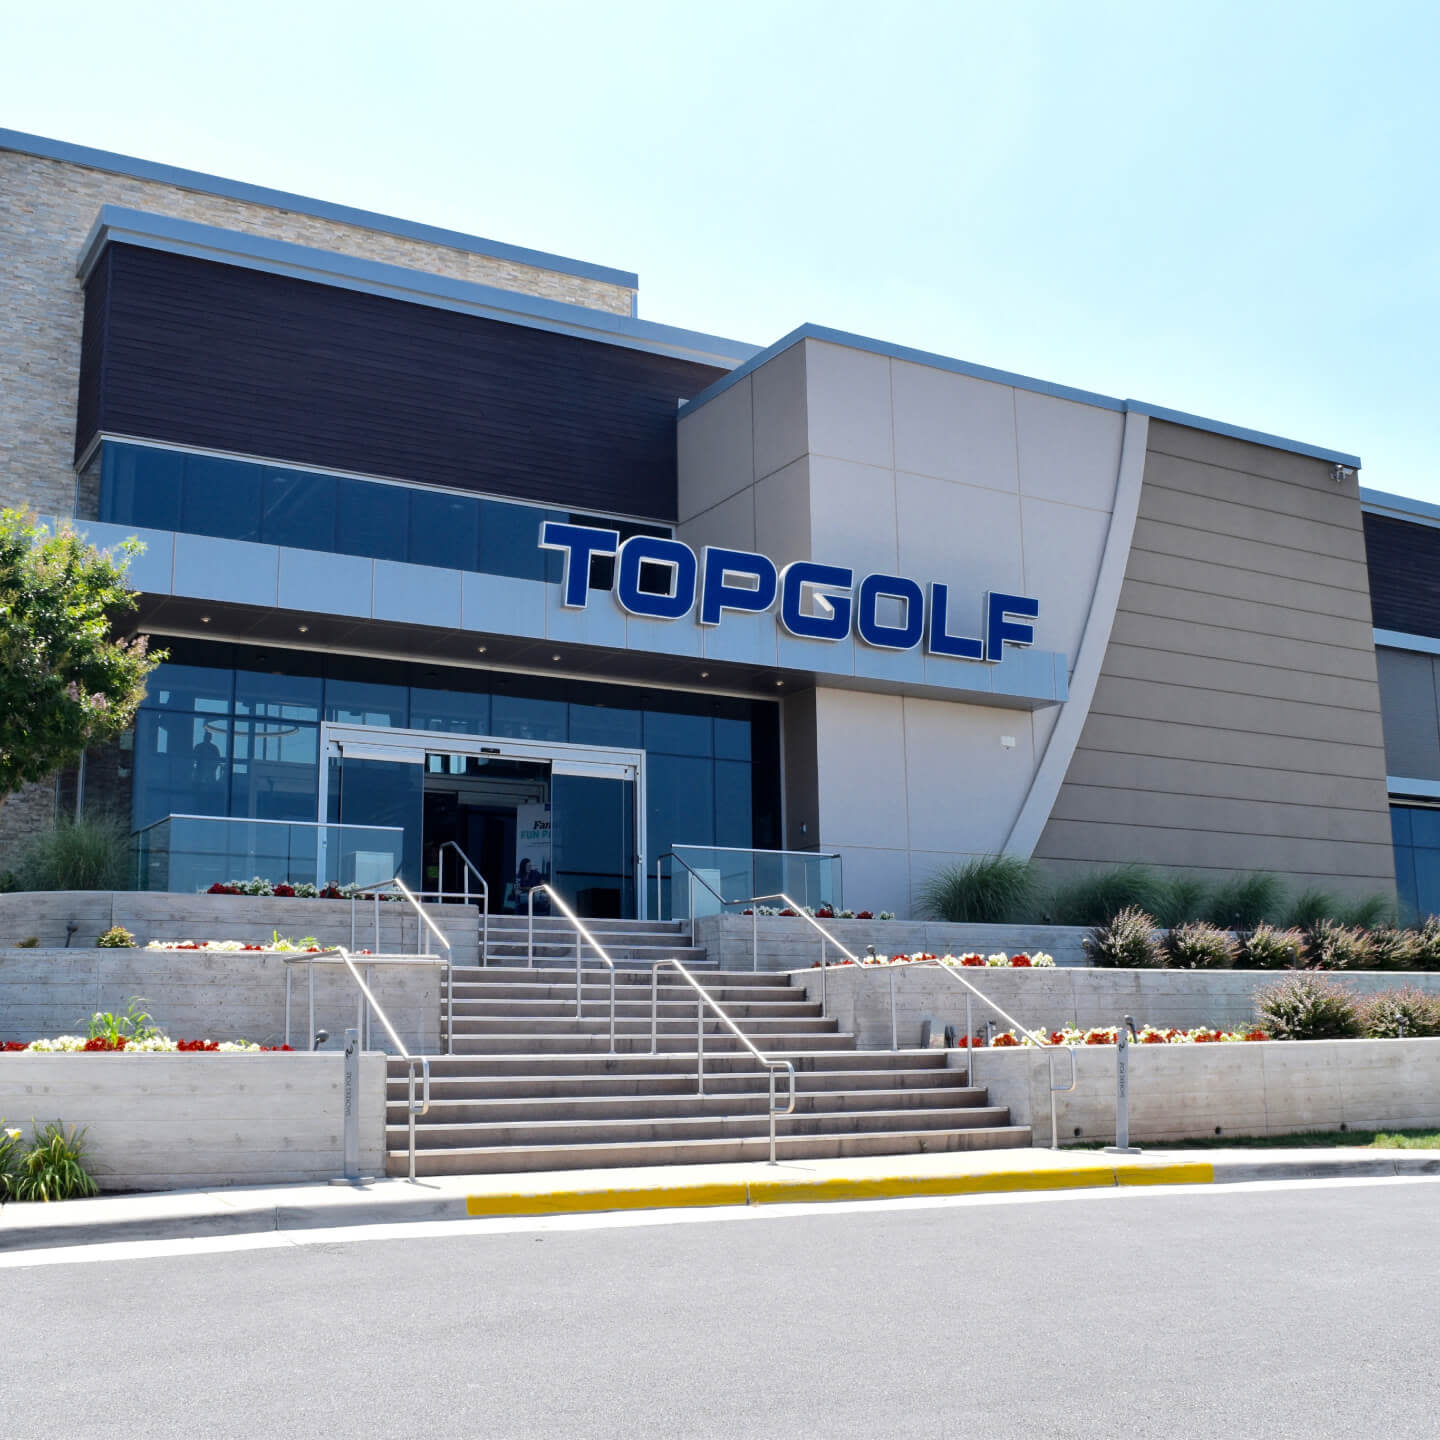 Front view of Topgolf's building